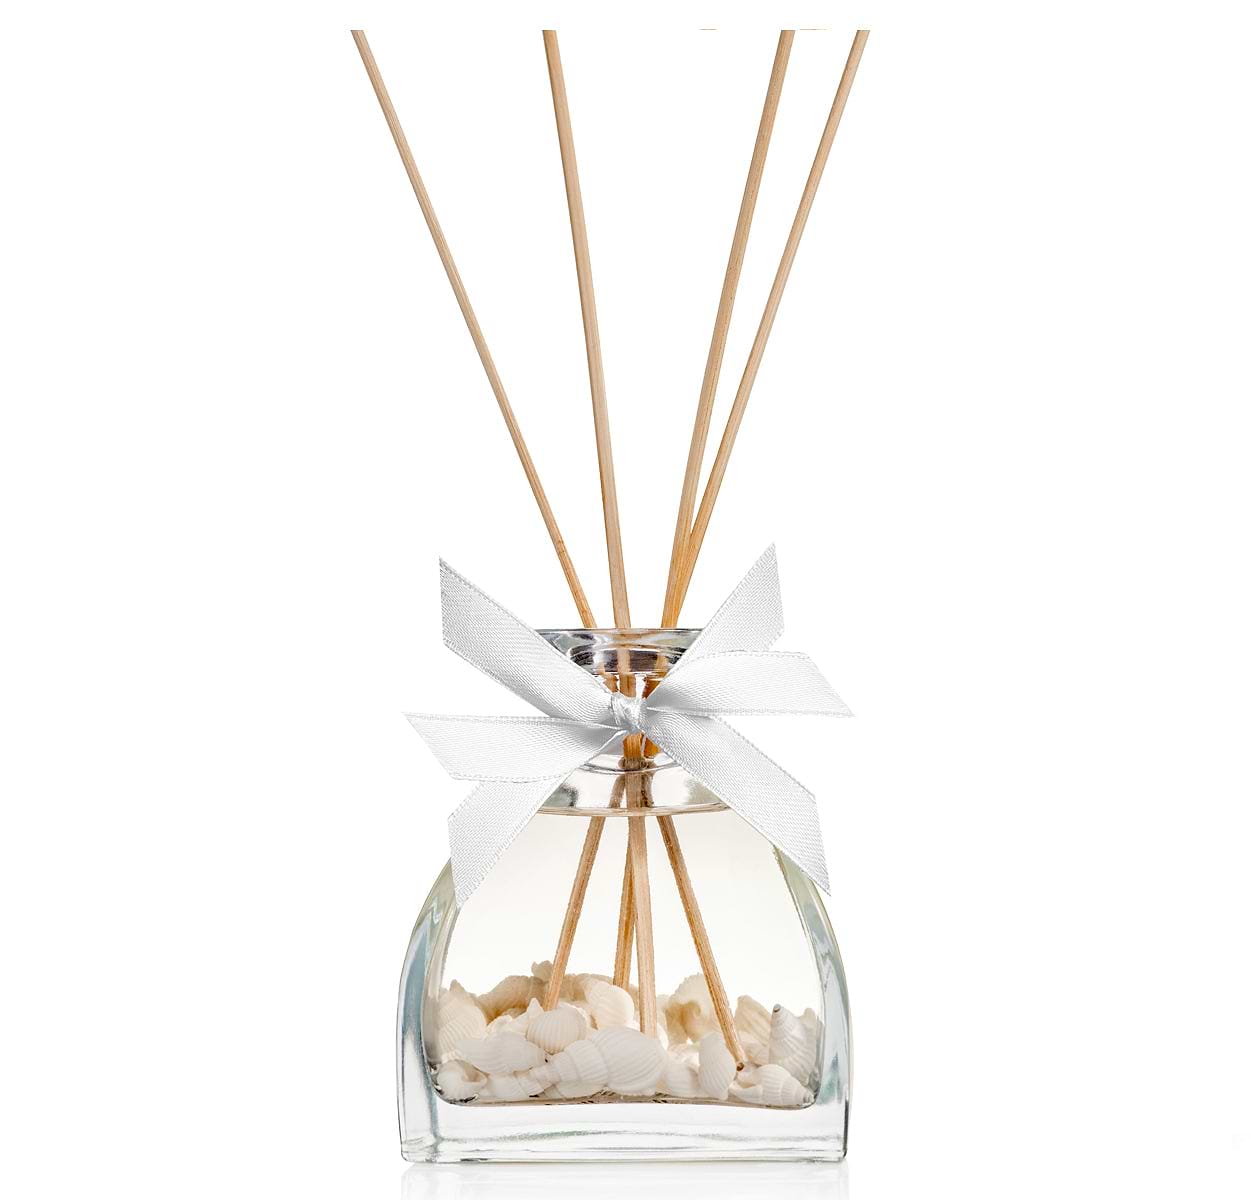 SPRING Fragrance Reed Diffuser Set |5.07oz (150ml) | Fragrance Made in France | Scented Aromatic Oil | Room Air Freshener with Sea Shells & White Flower| Lily, Jasmine, Lily of The Valley and Tuberose